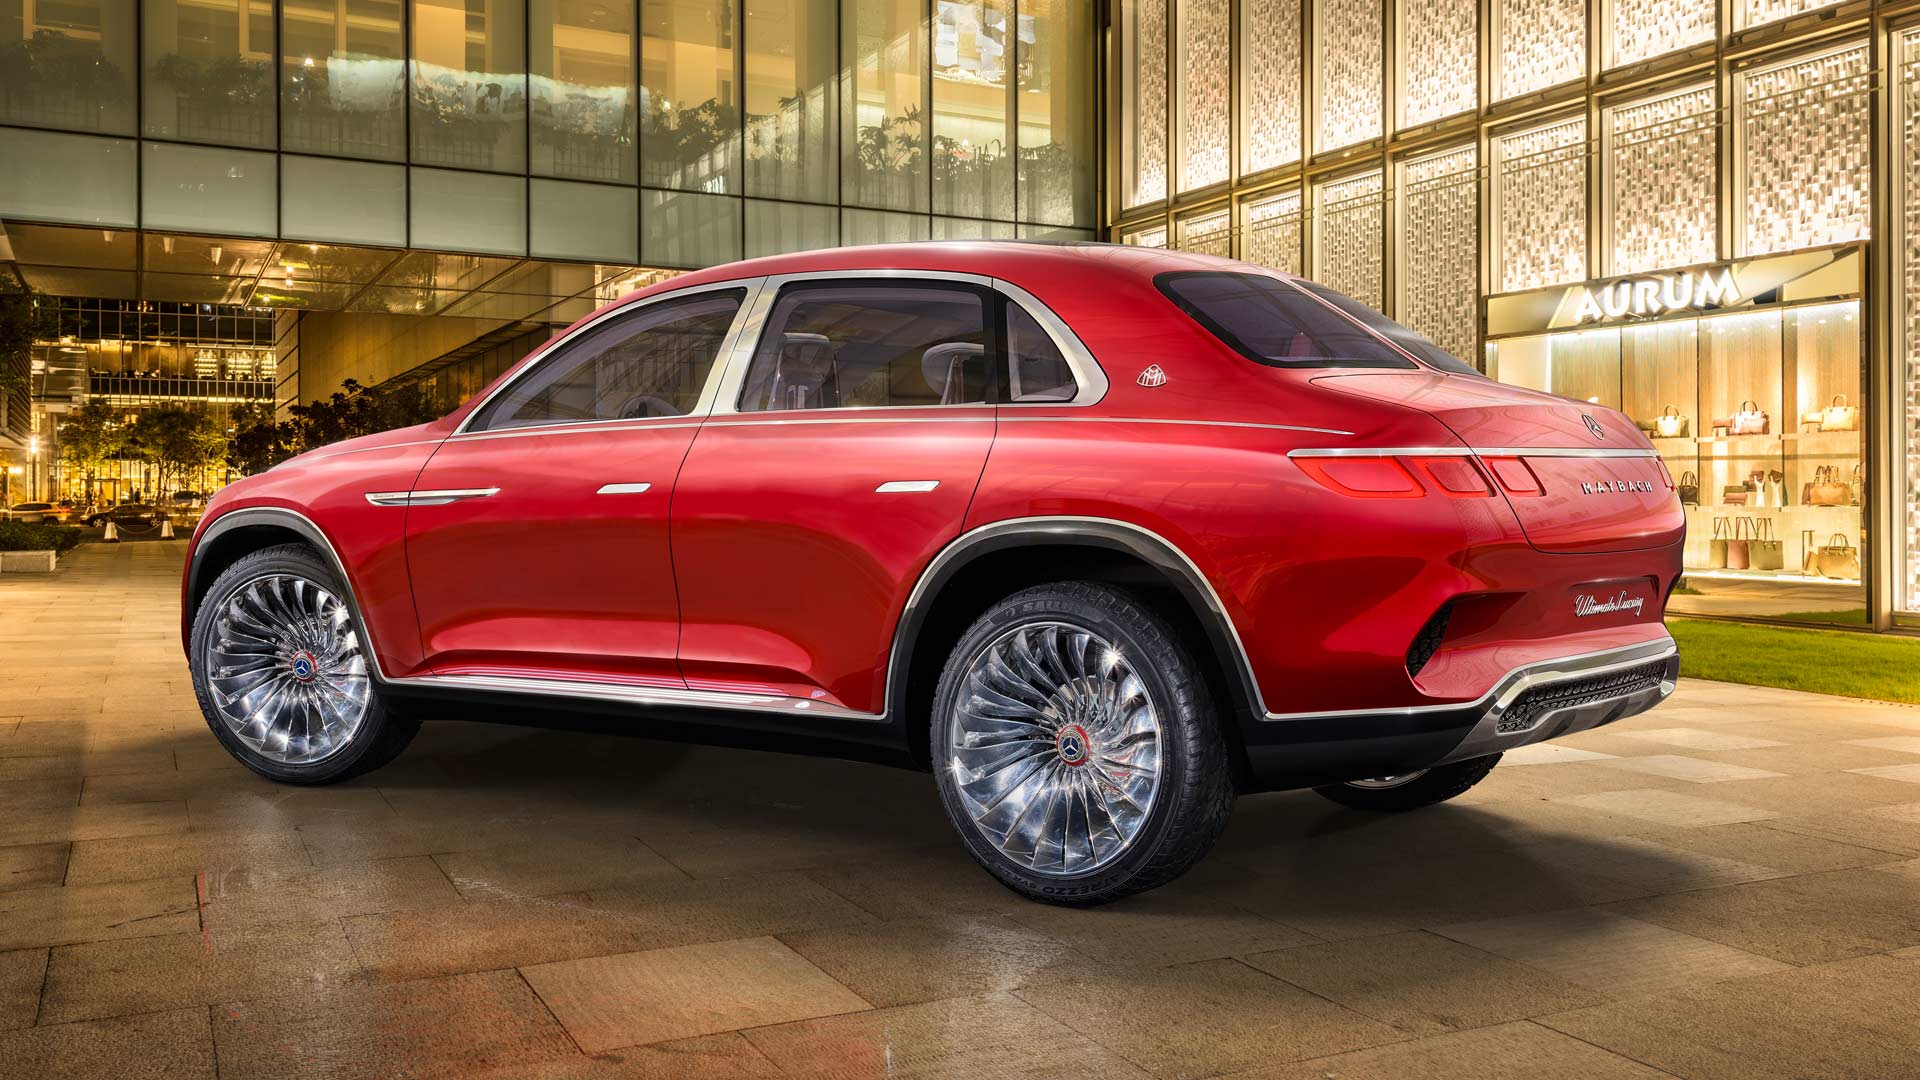 Vision-Mercedes-Maybach-Ultimate-Luxury-Crossover-SUV_2